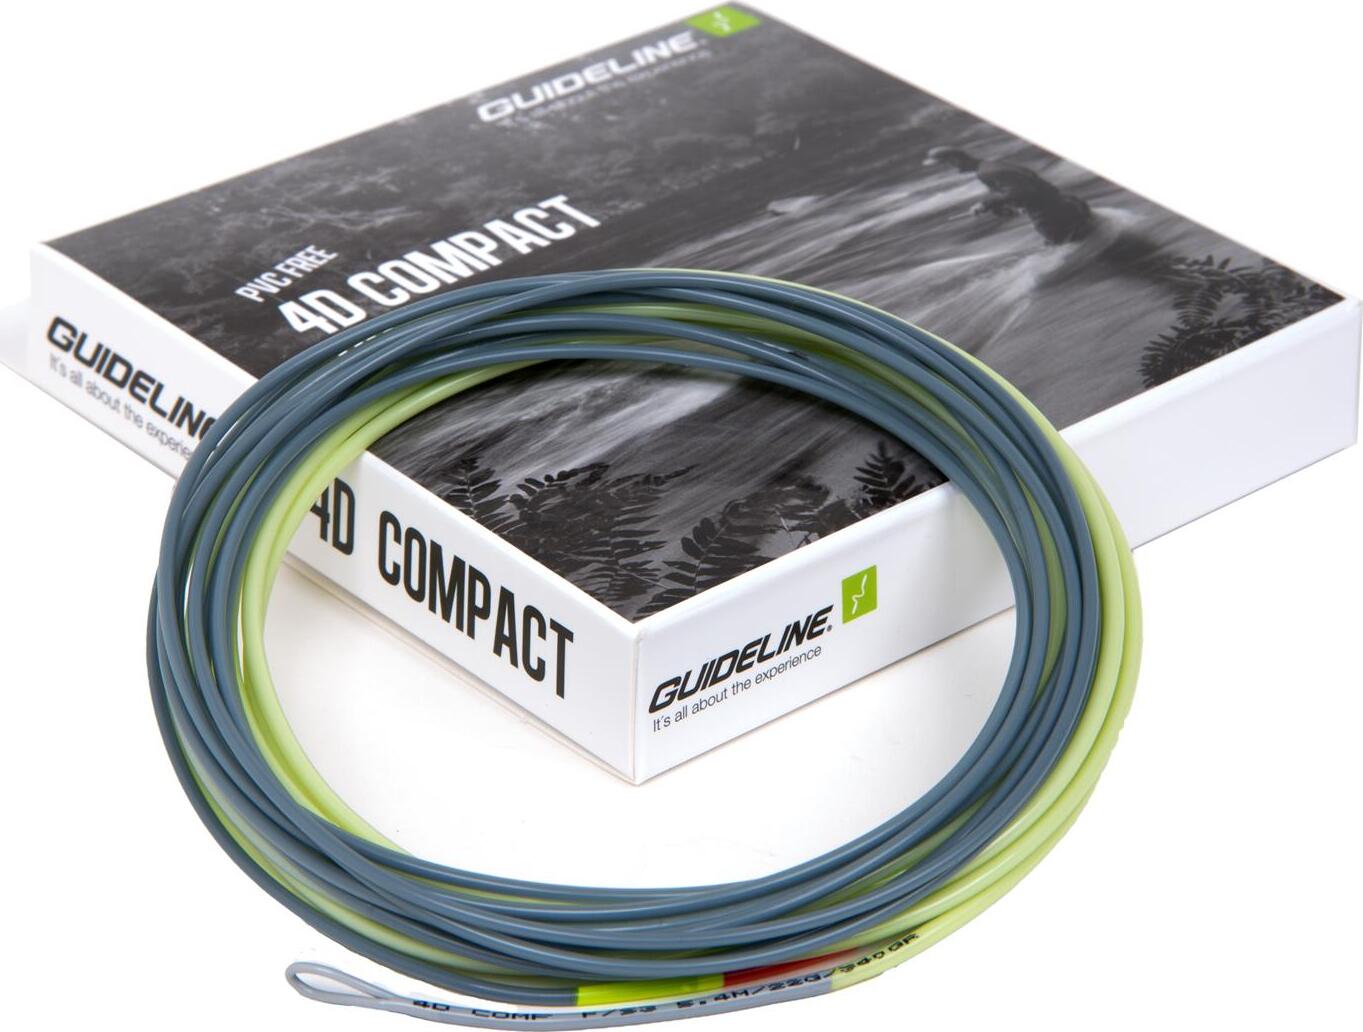 Guideline 4D Compact Body Fly Line – Glasgow Angling Centre